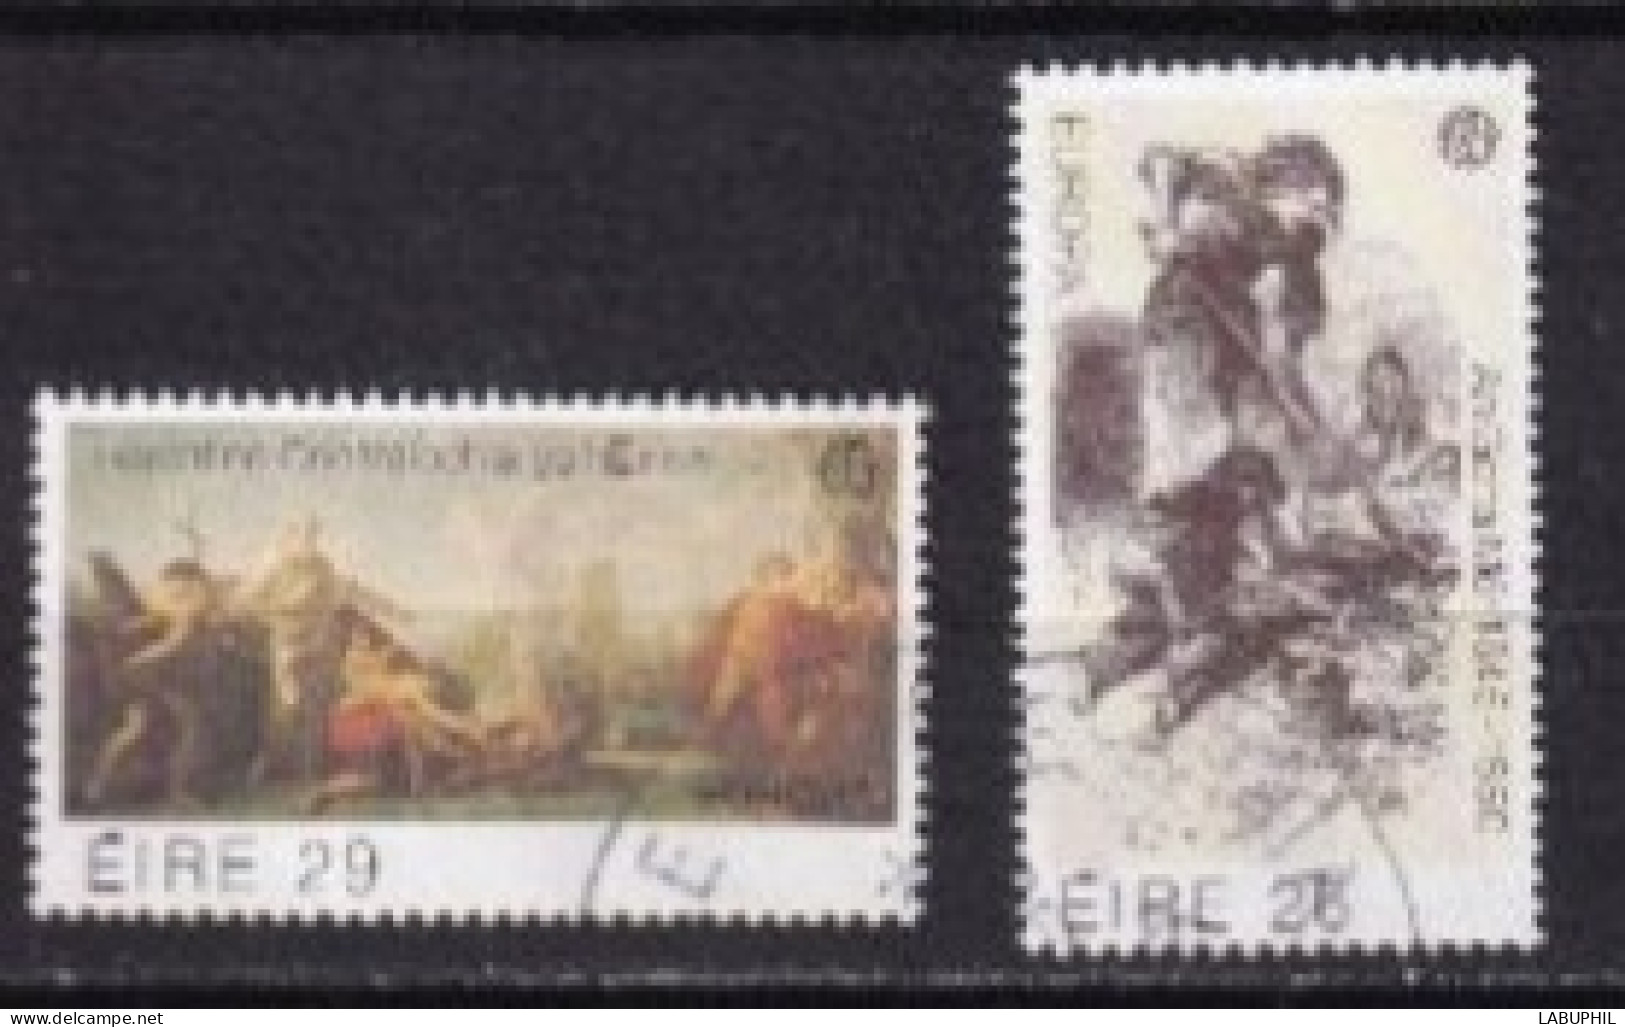 IRLANDE USED OBLITERE  1982 Europa - Used Stamps